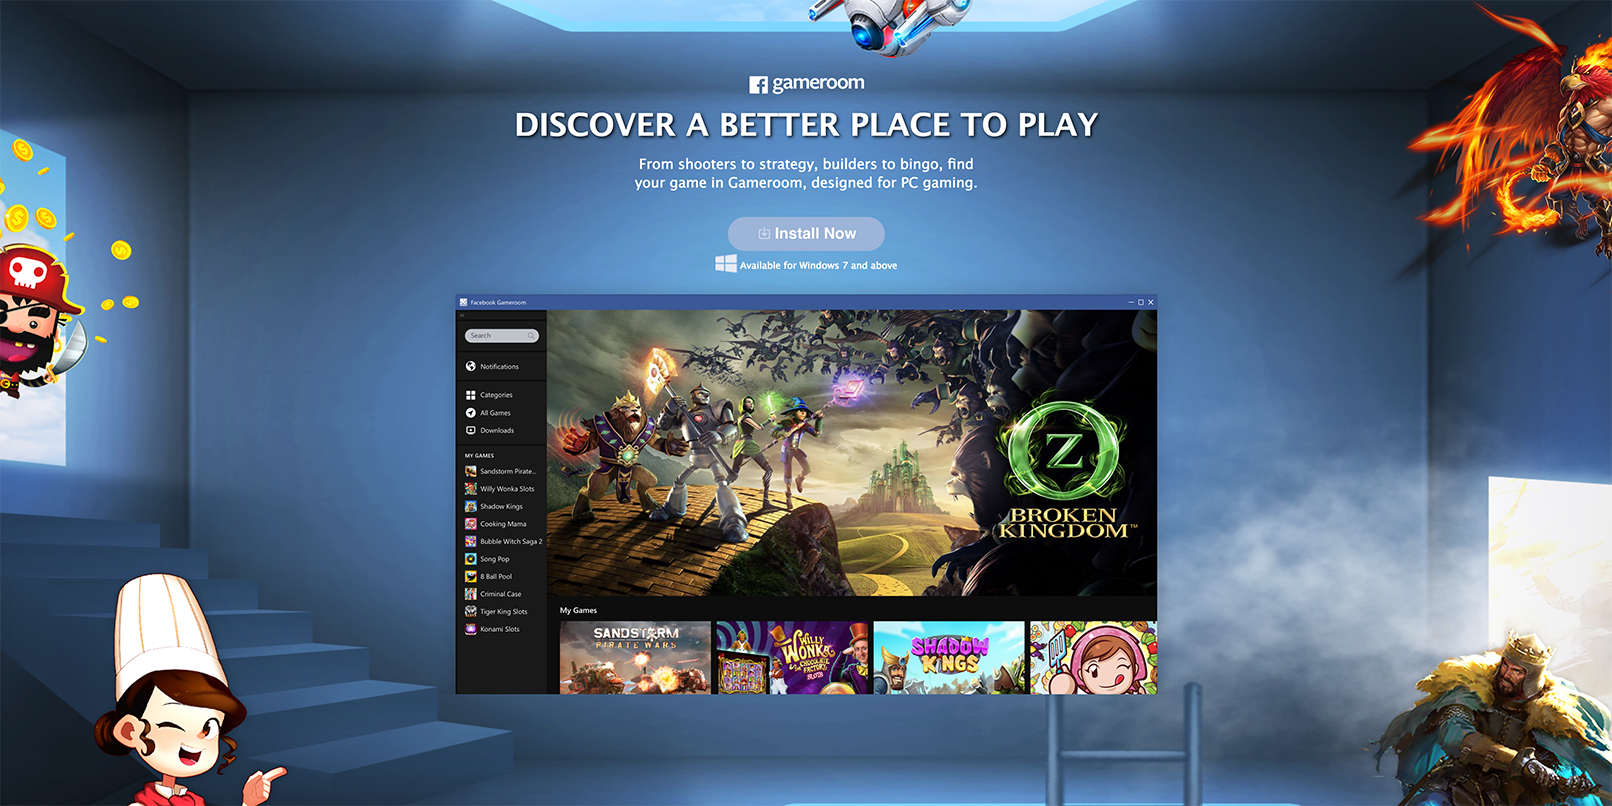 Facebook has Steam in its crosshairs with new Gameroom platform